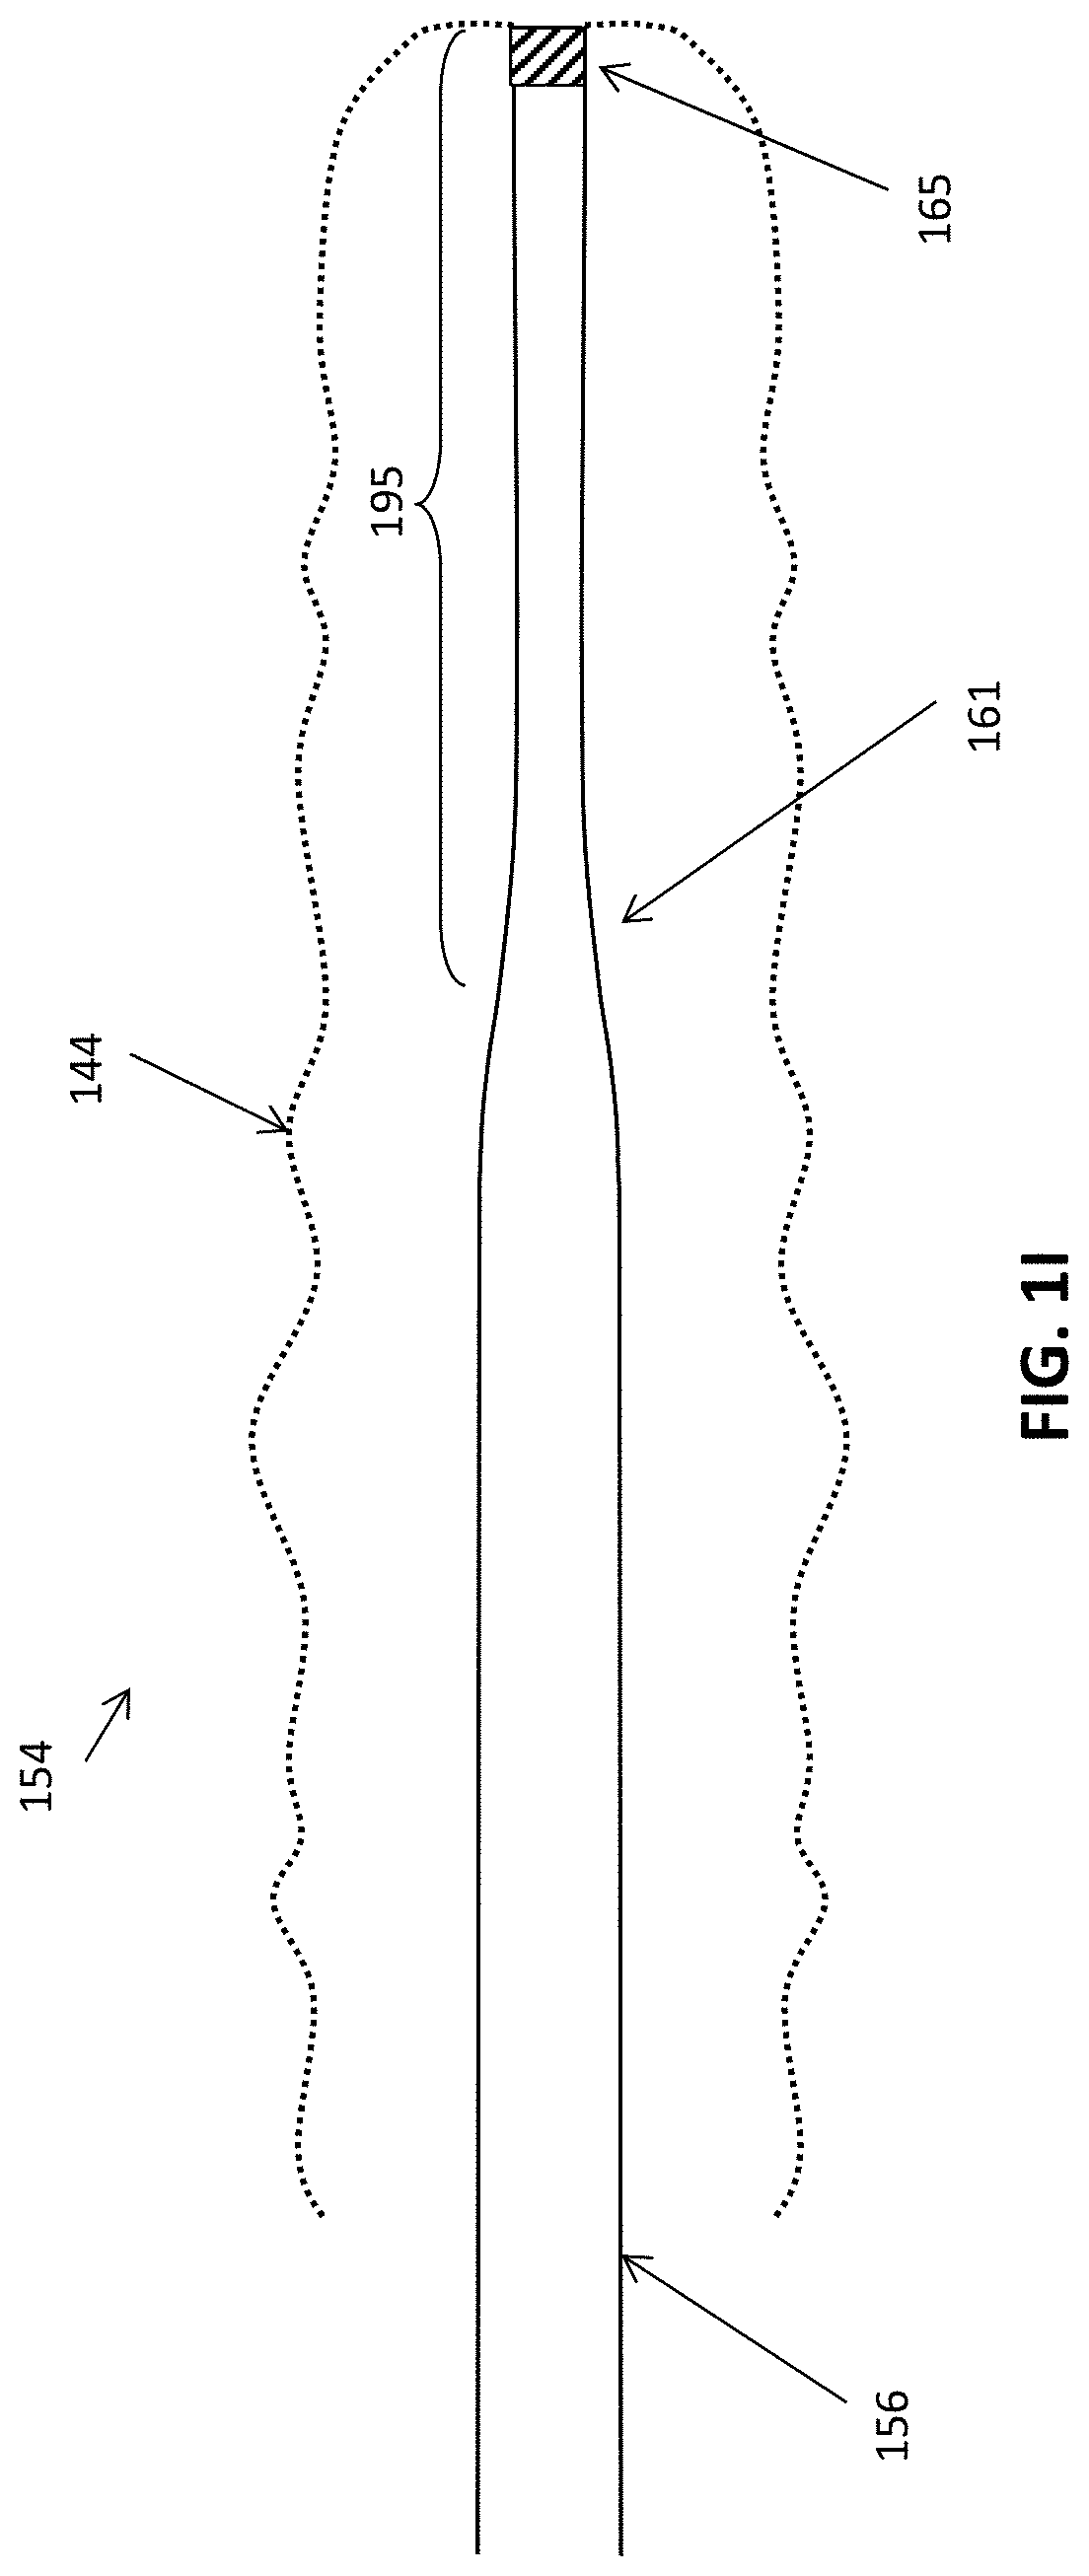 Inverting thrombectomy apparatuses and methods